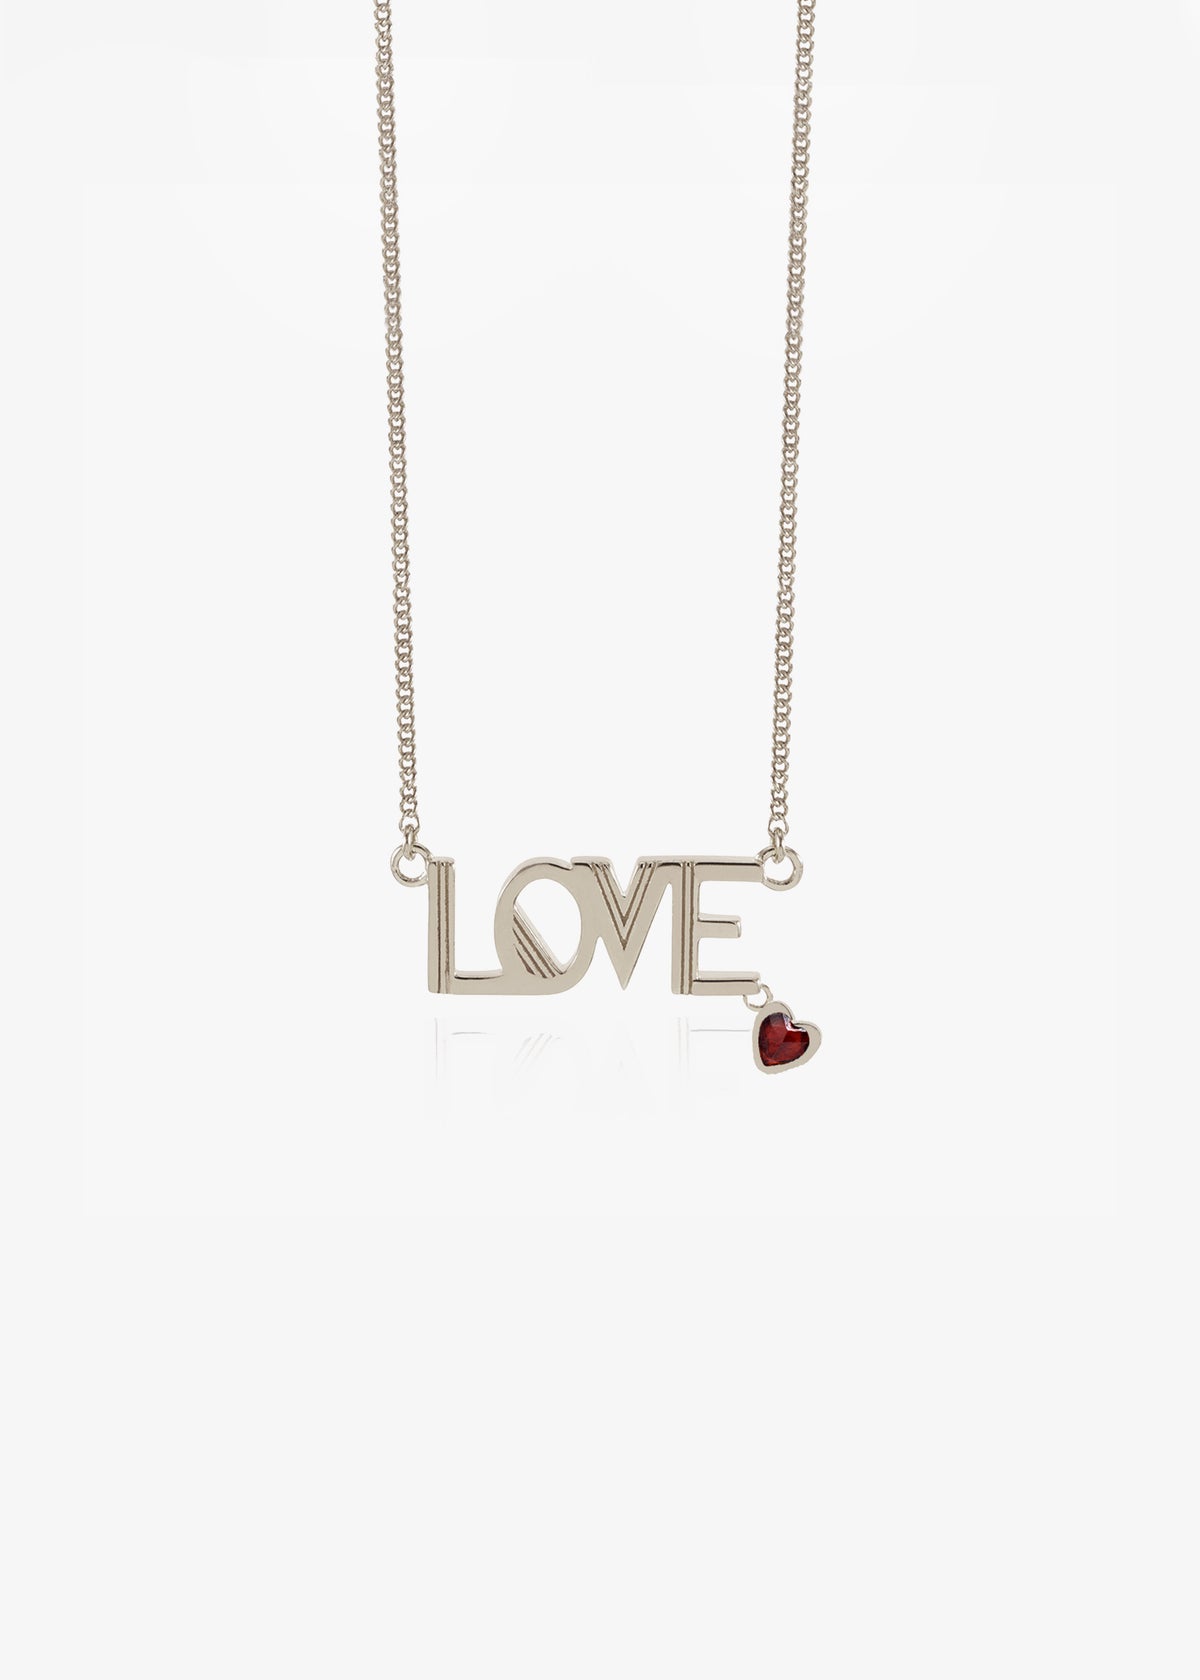 Choose Love Charity Necklace